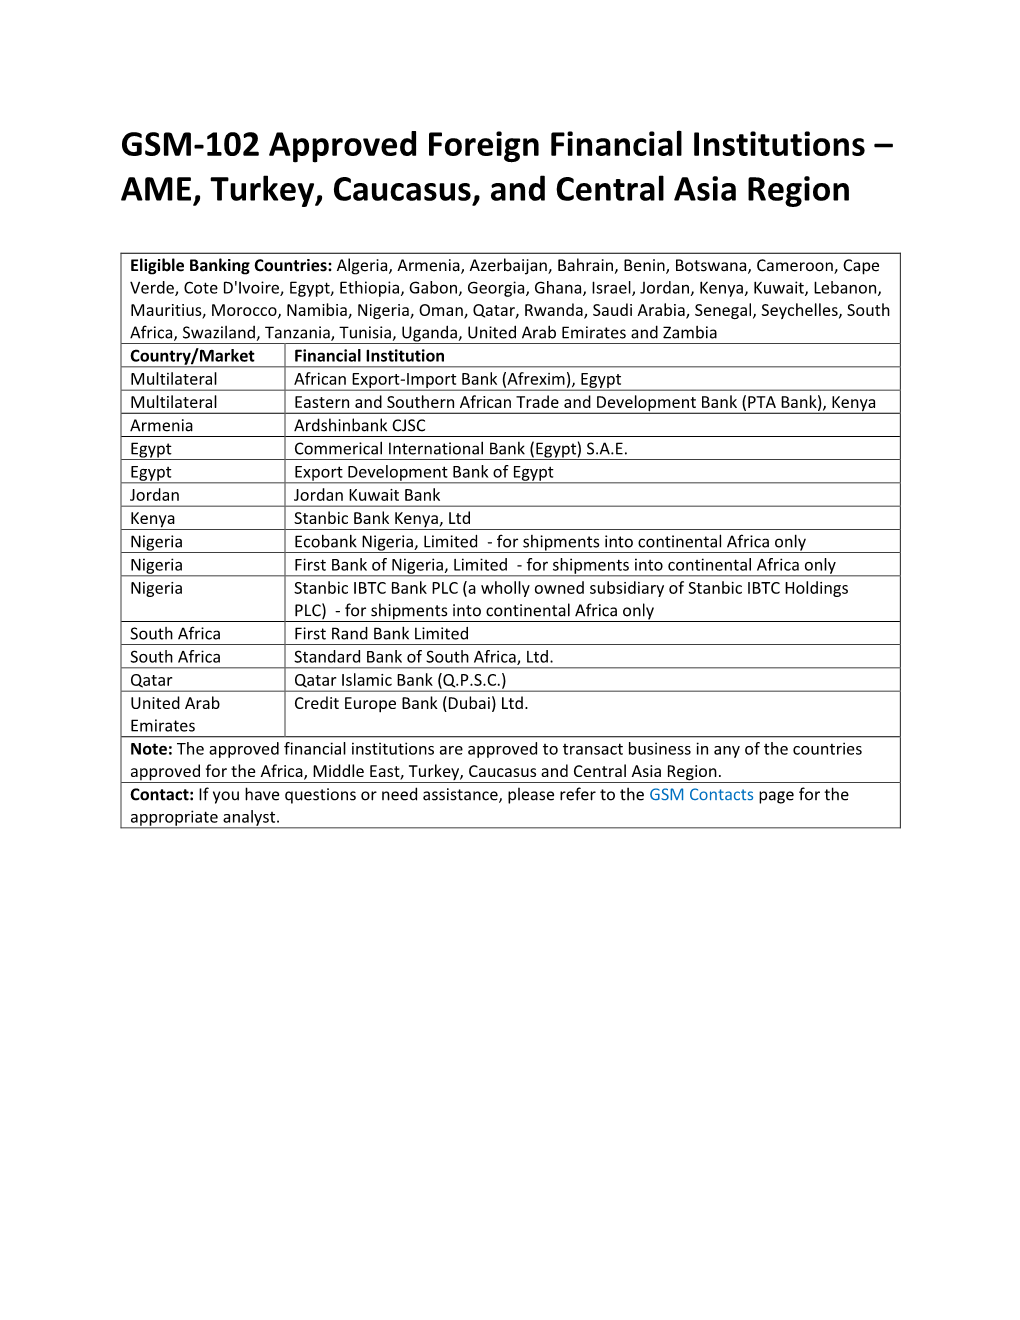 GSM-102 Approved Foreign Financial Institutions – AME, Turkey, Caucasus, and Central Asia Region